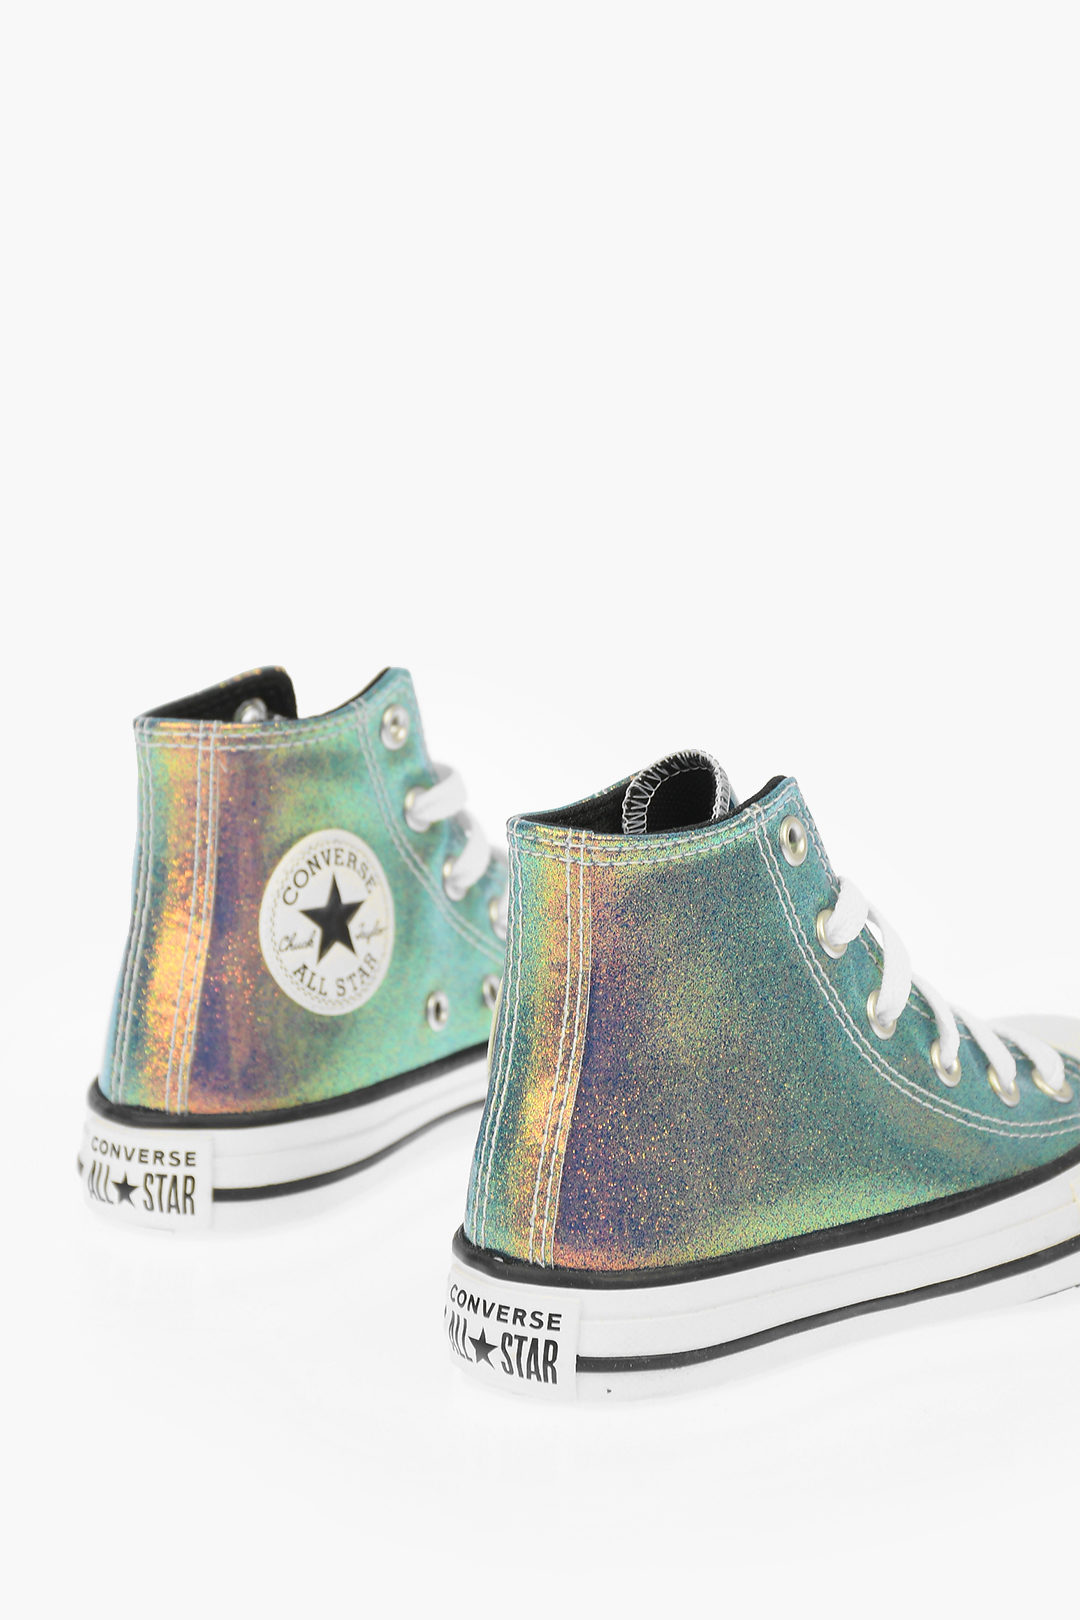 bias Damp sponge Converse KIDS CHUCK TAYLOR ALL STAR Glittered Sneakers girls - Glamood  Outlet